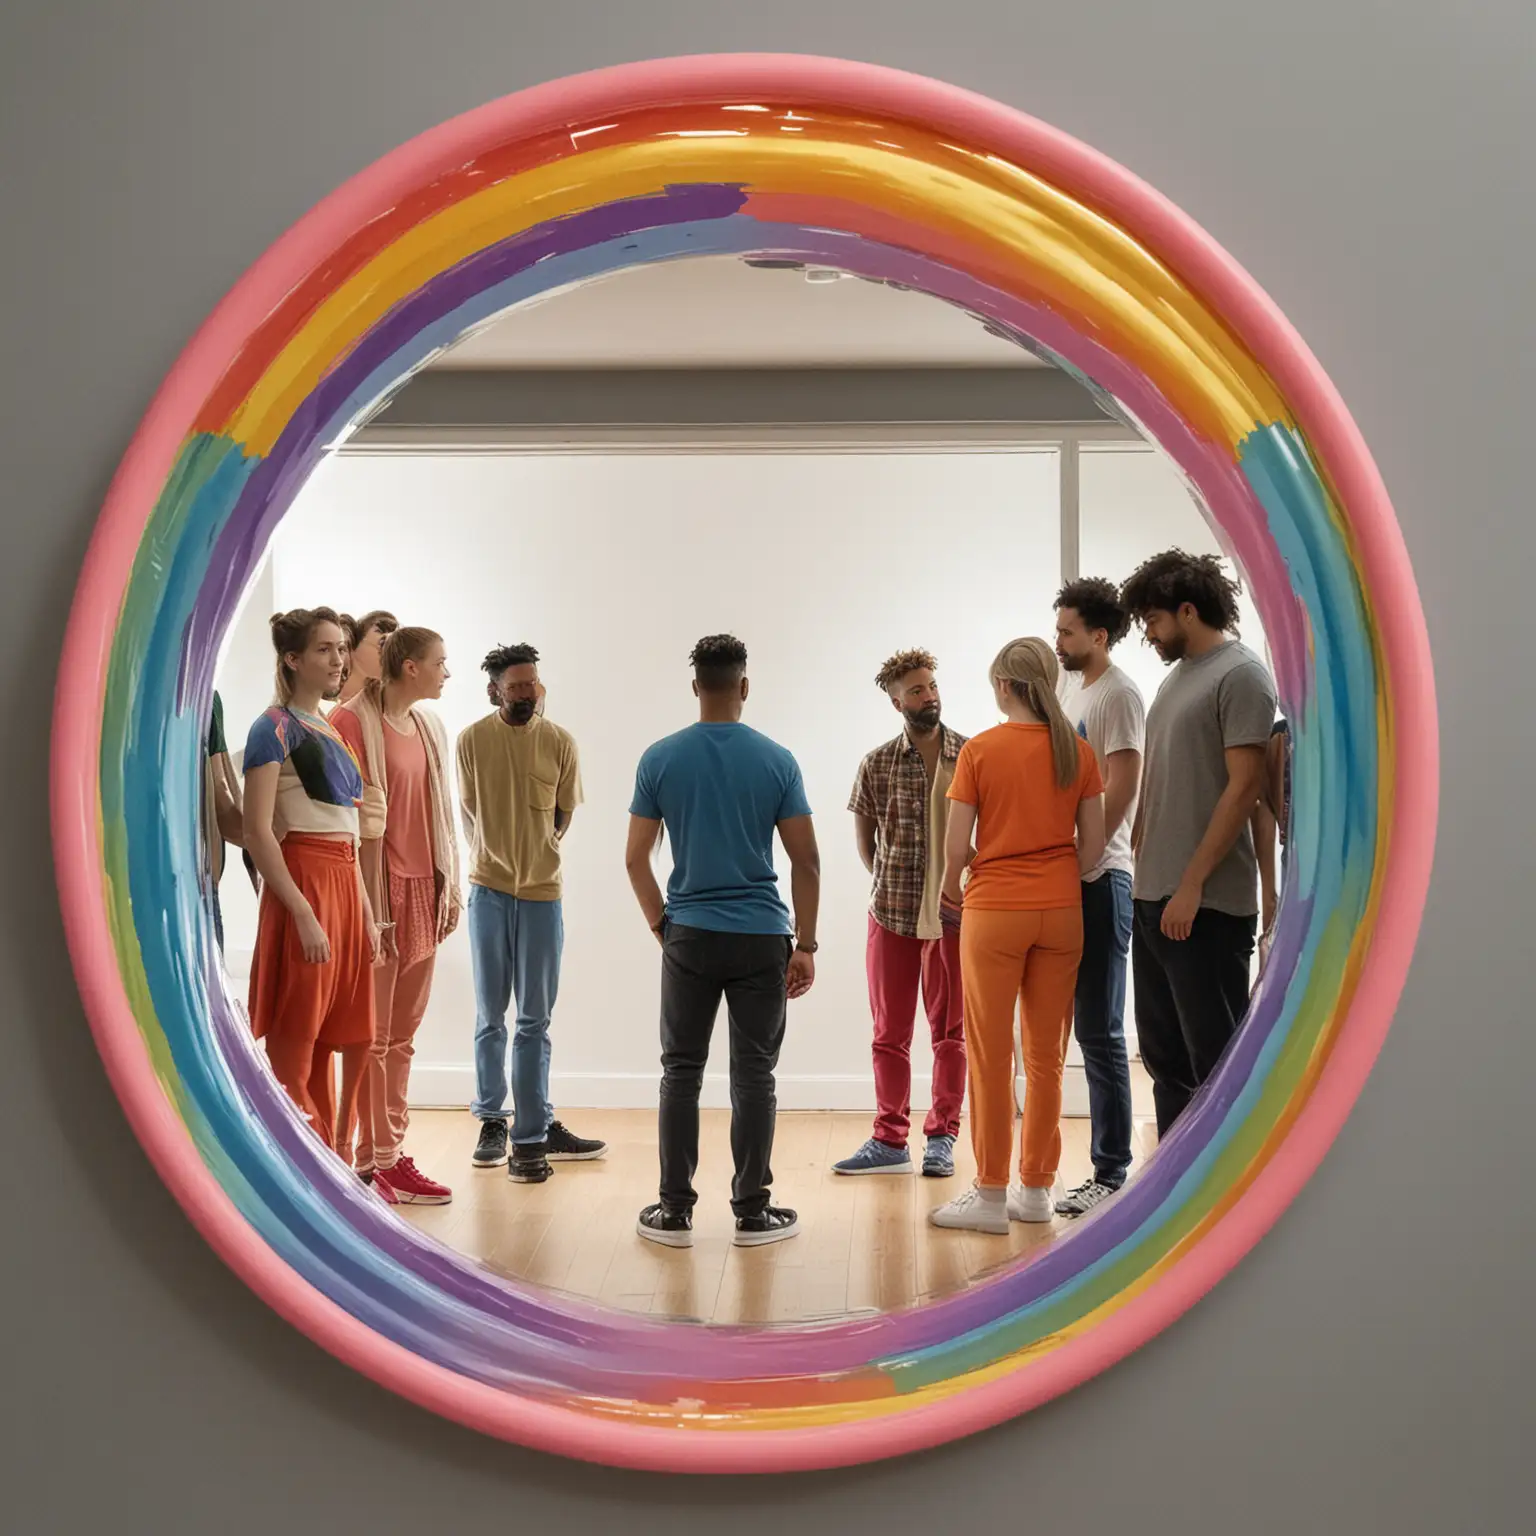 mirror with rainbow frame with mixed gender and race  group looking at reflections
